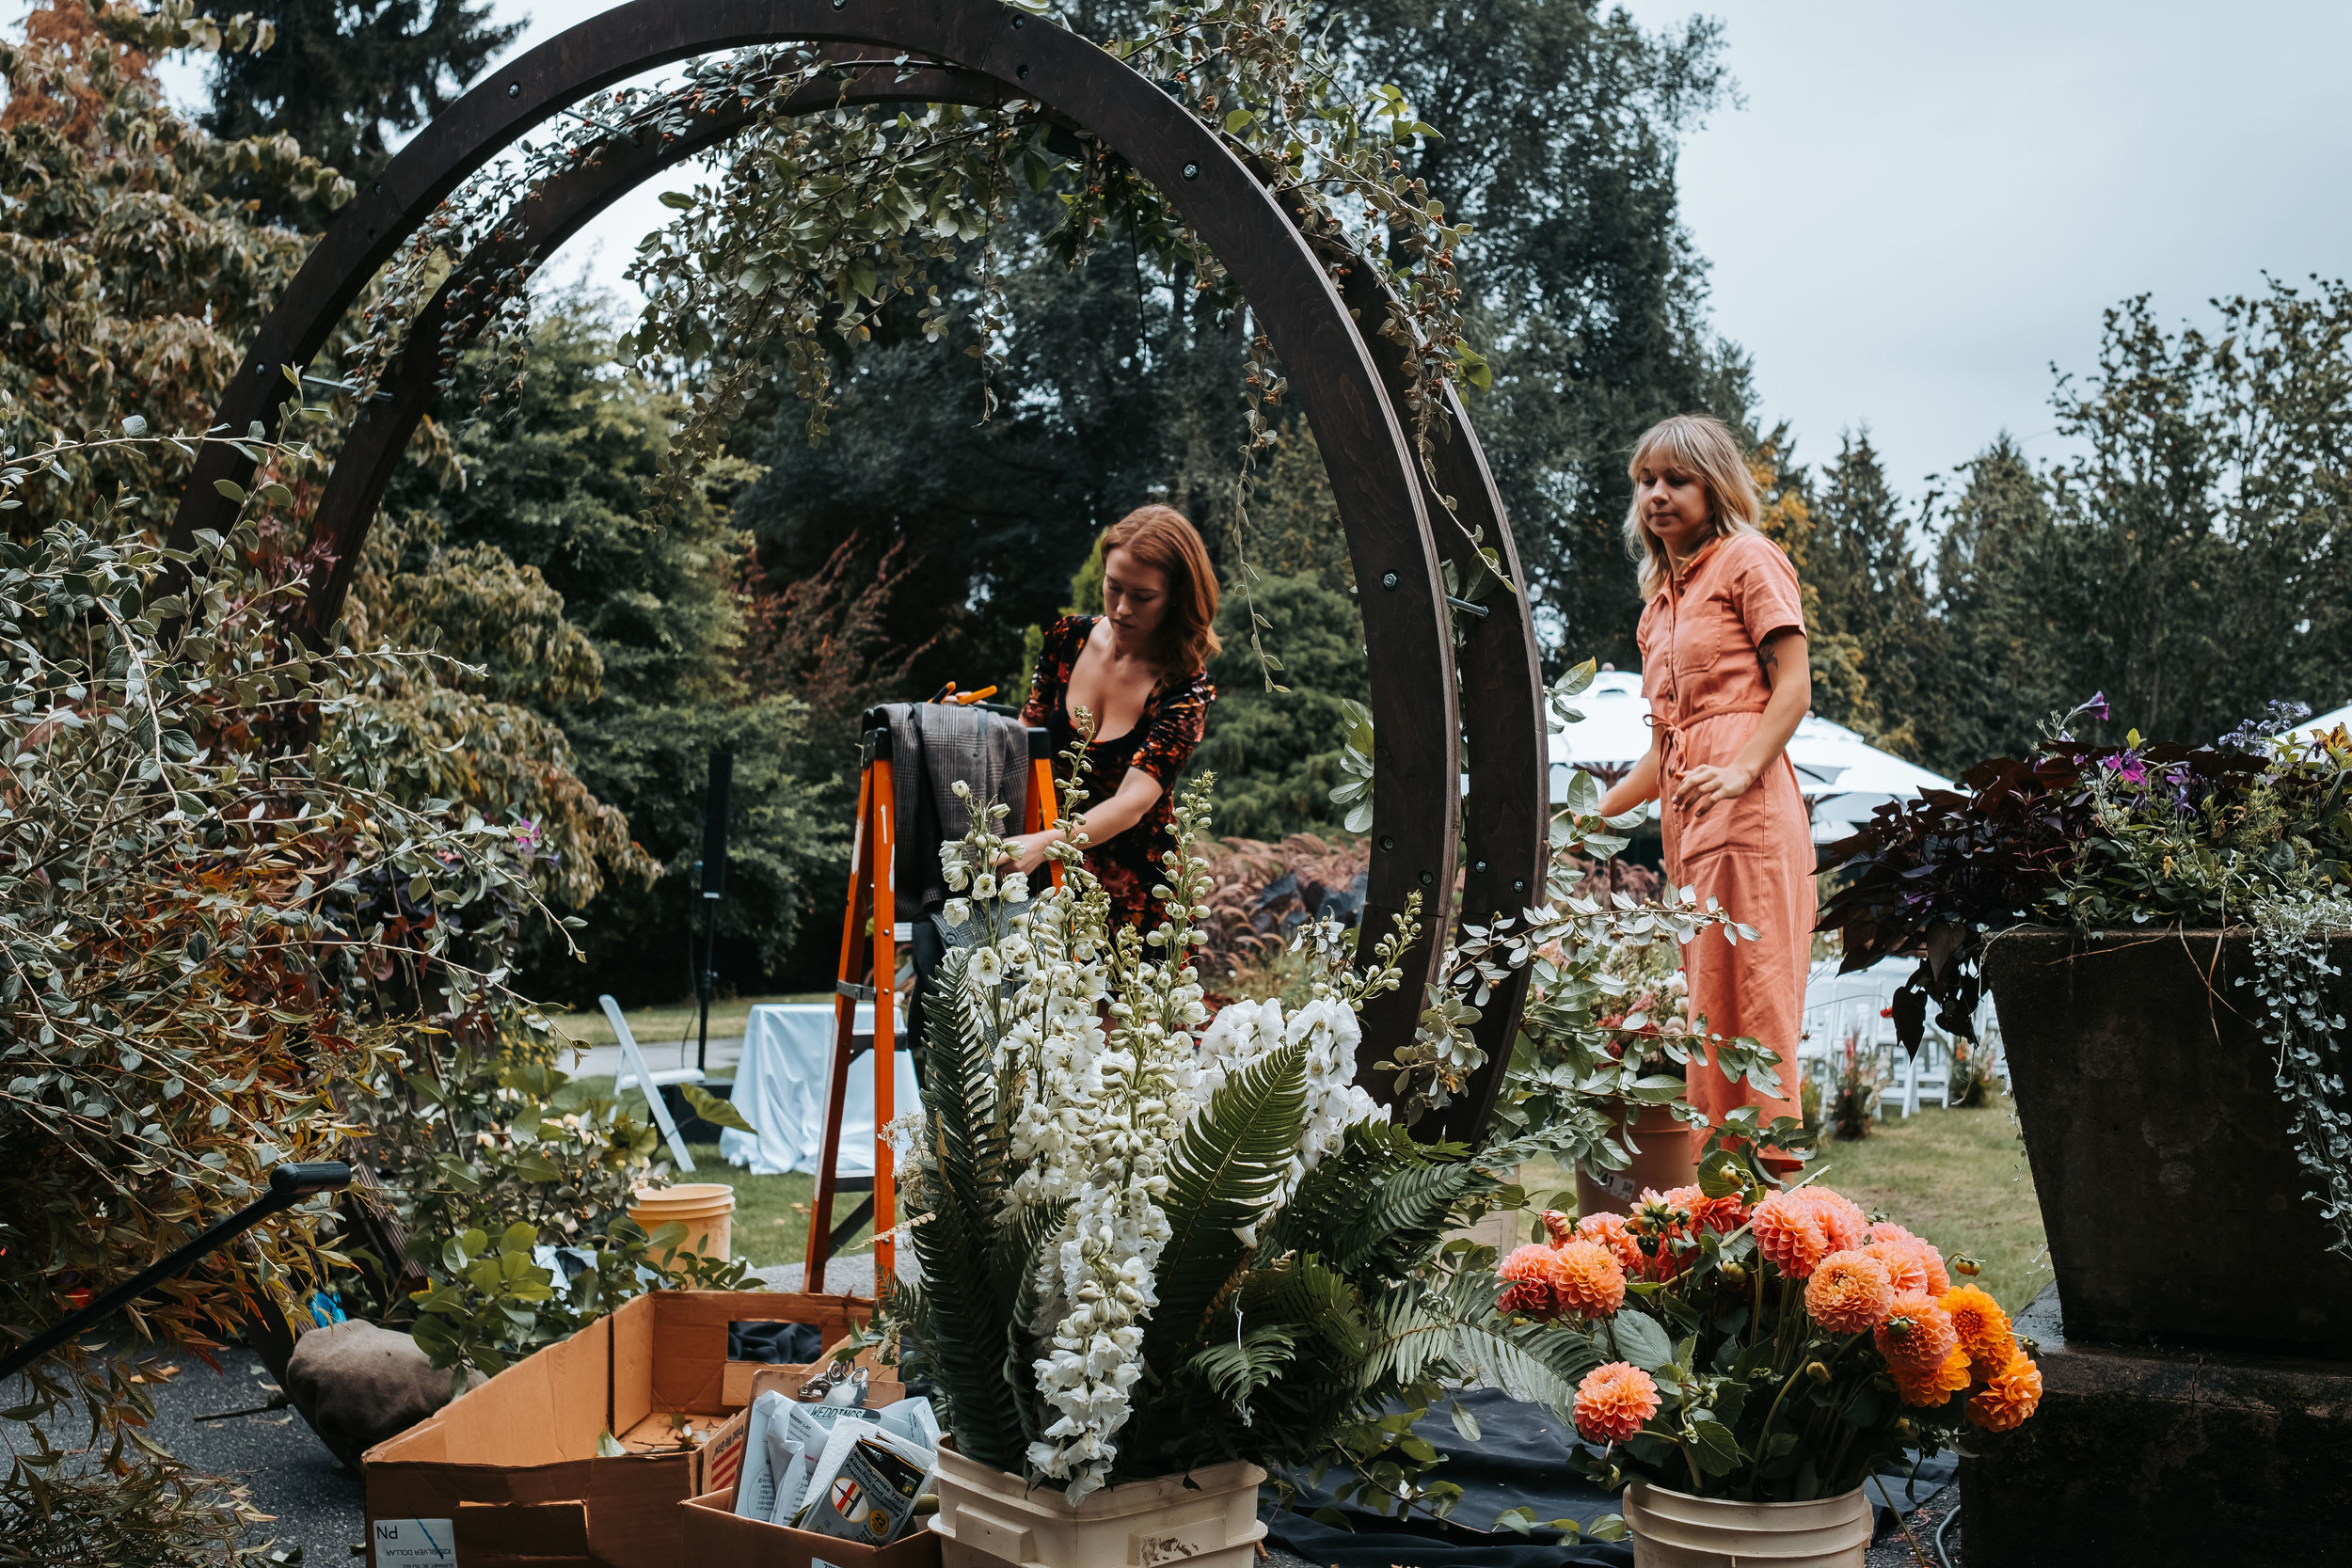 Floralista sets up the flowers and greenery to decorate the wooden circular arch outside at the Stanley Park Pavilion | Keepsake Events